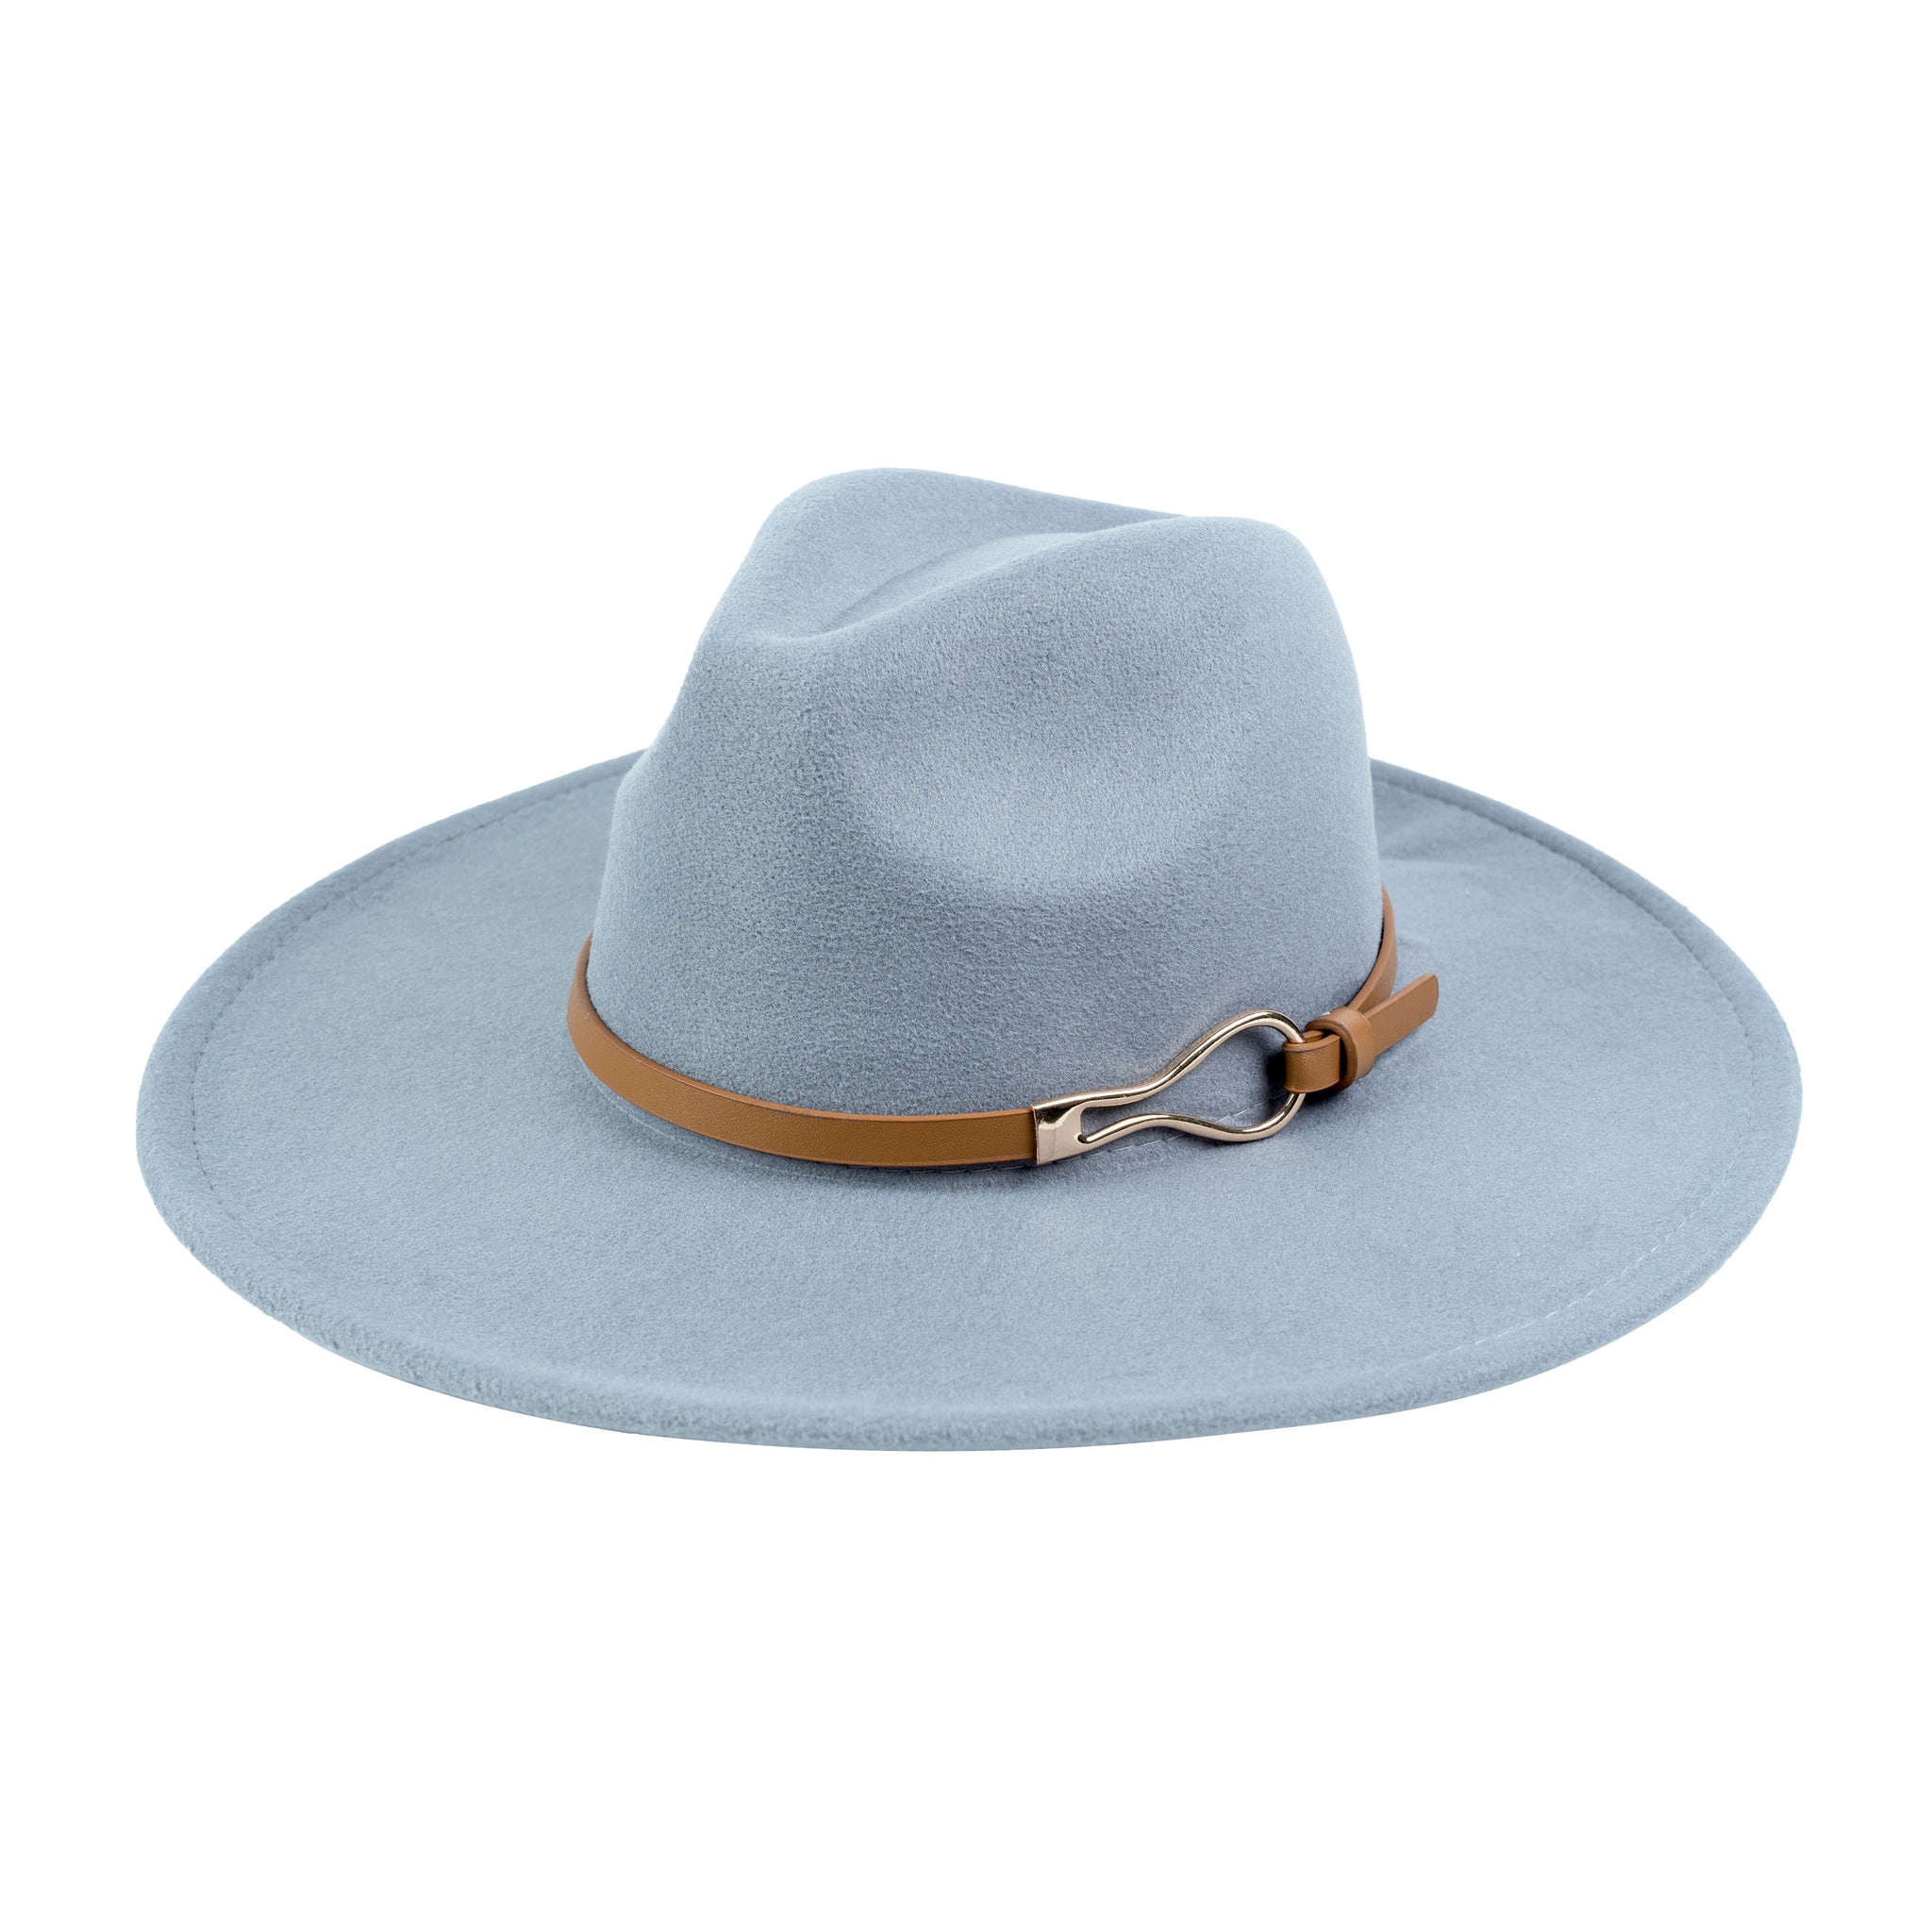 Chokore Fedora Hat with PU Leather Belt and Buckle (Light Gray)